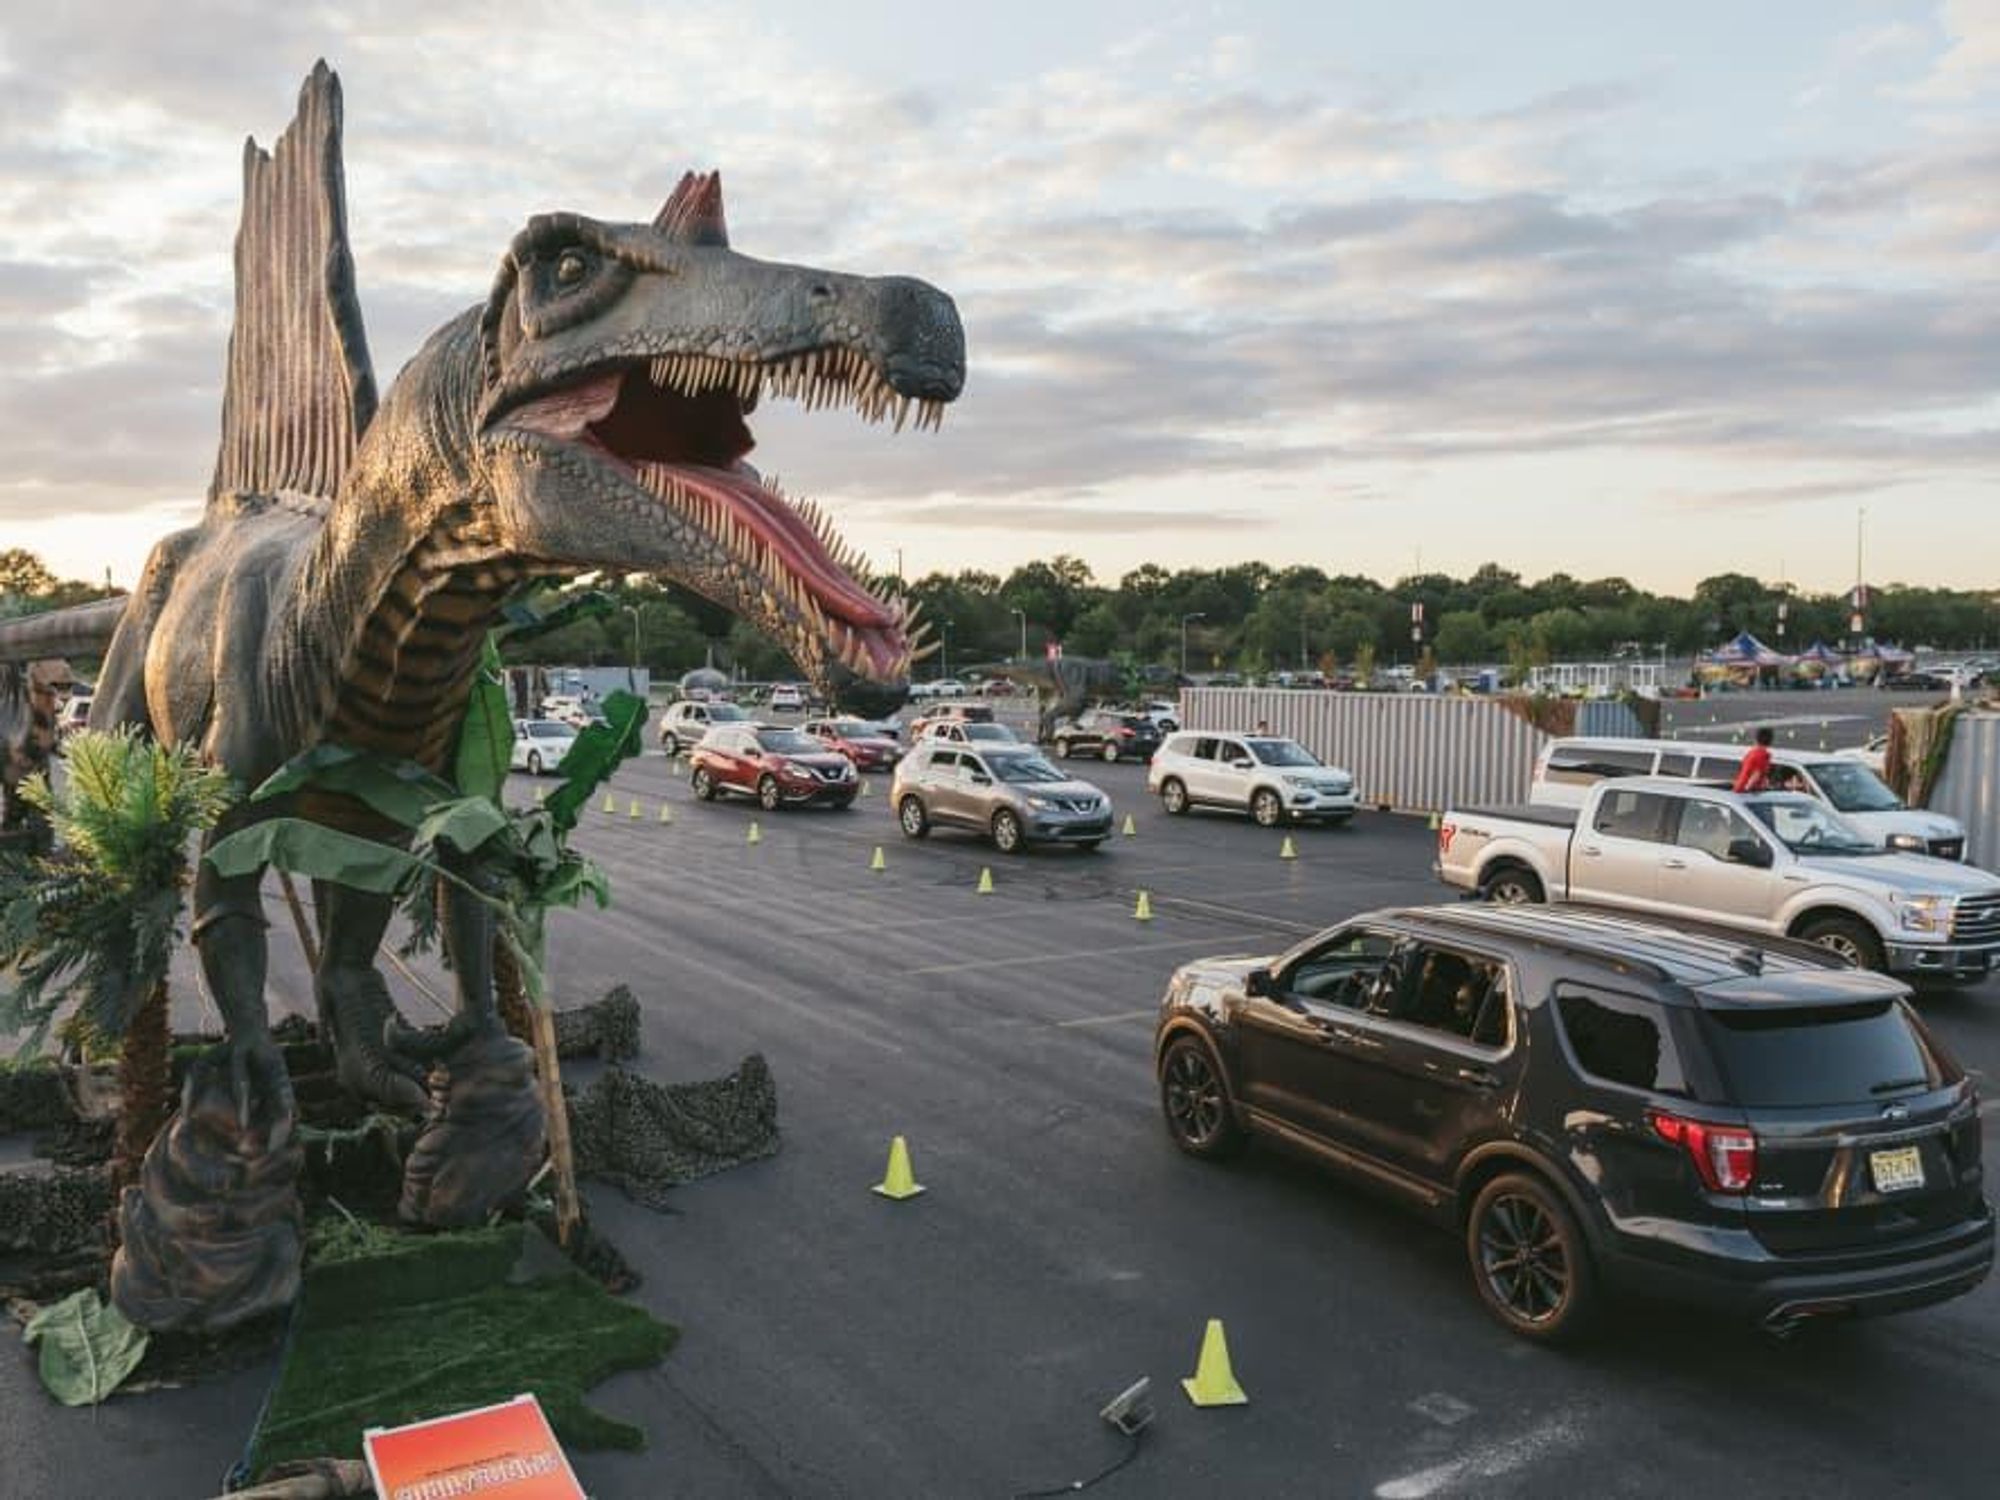 Drivethrough dinosaurs invade Austin with realistic roars and more